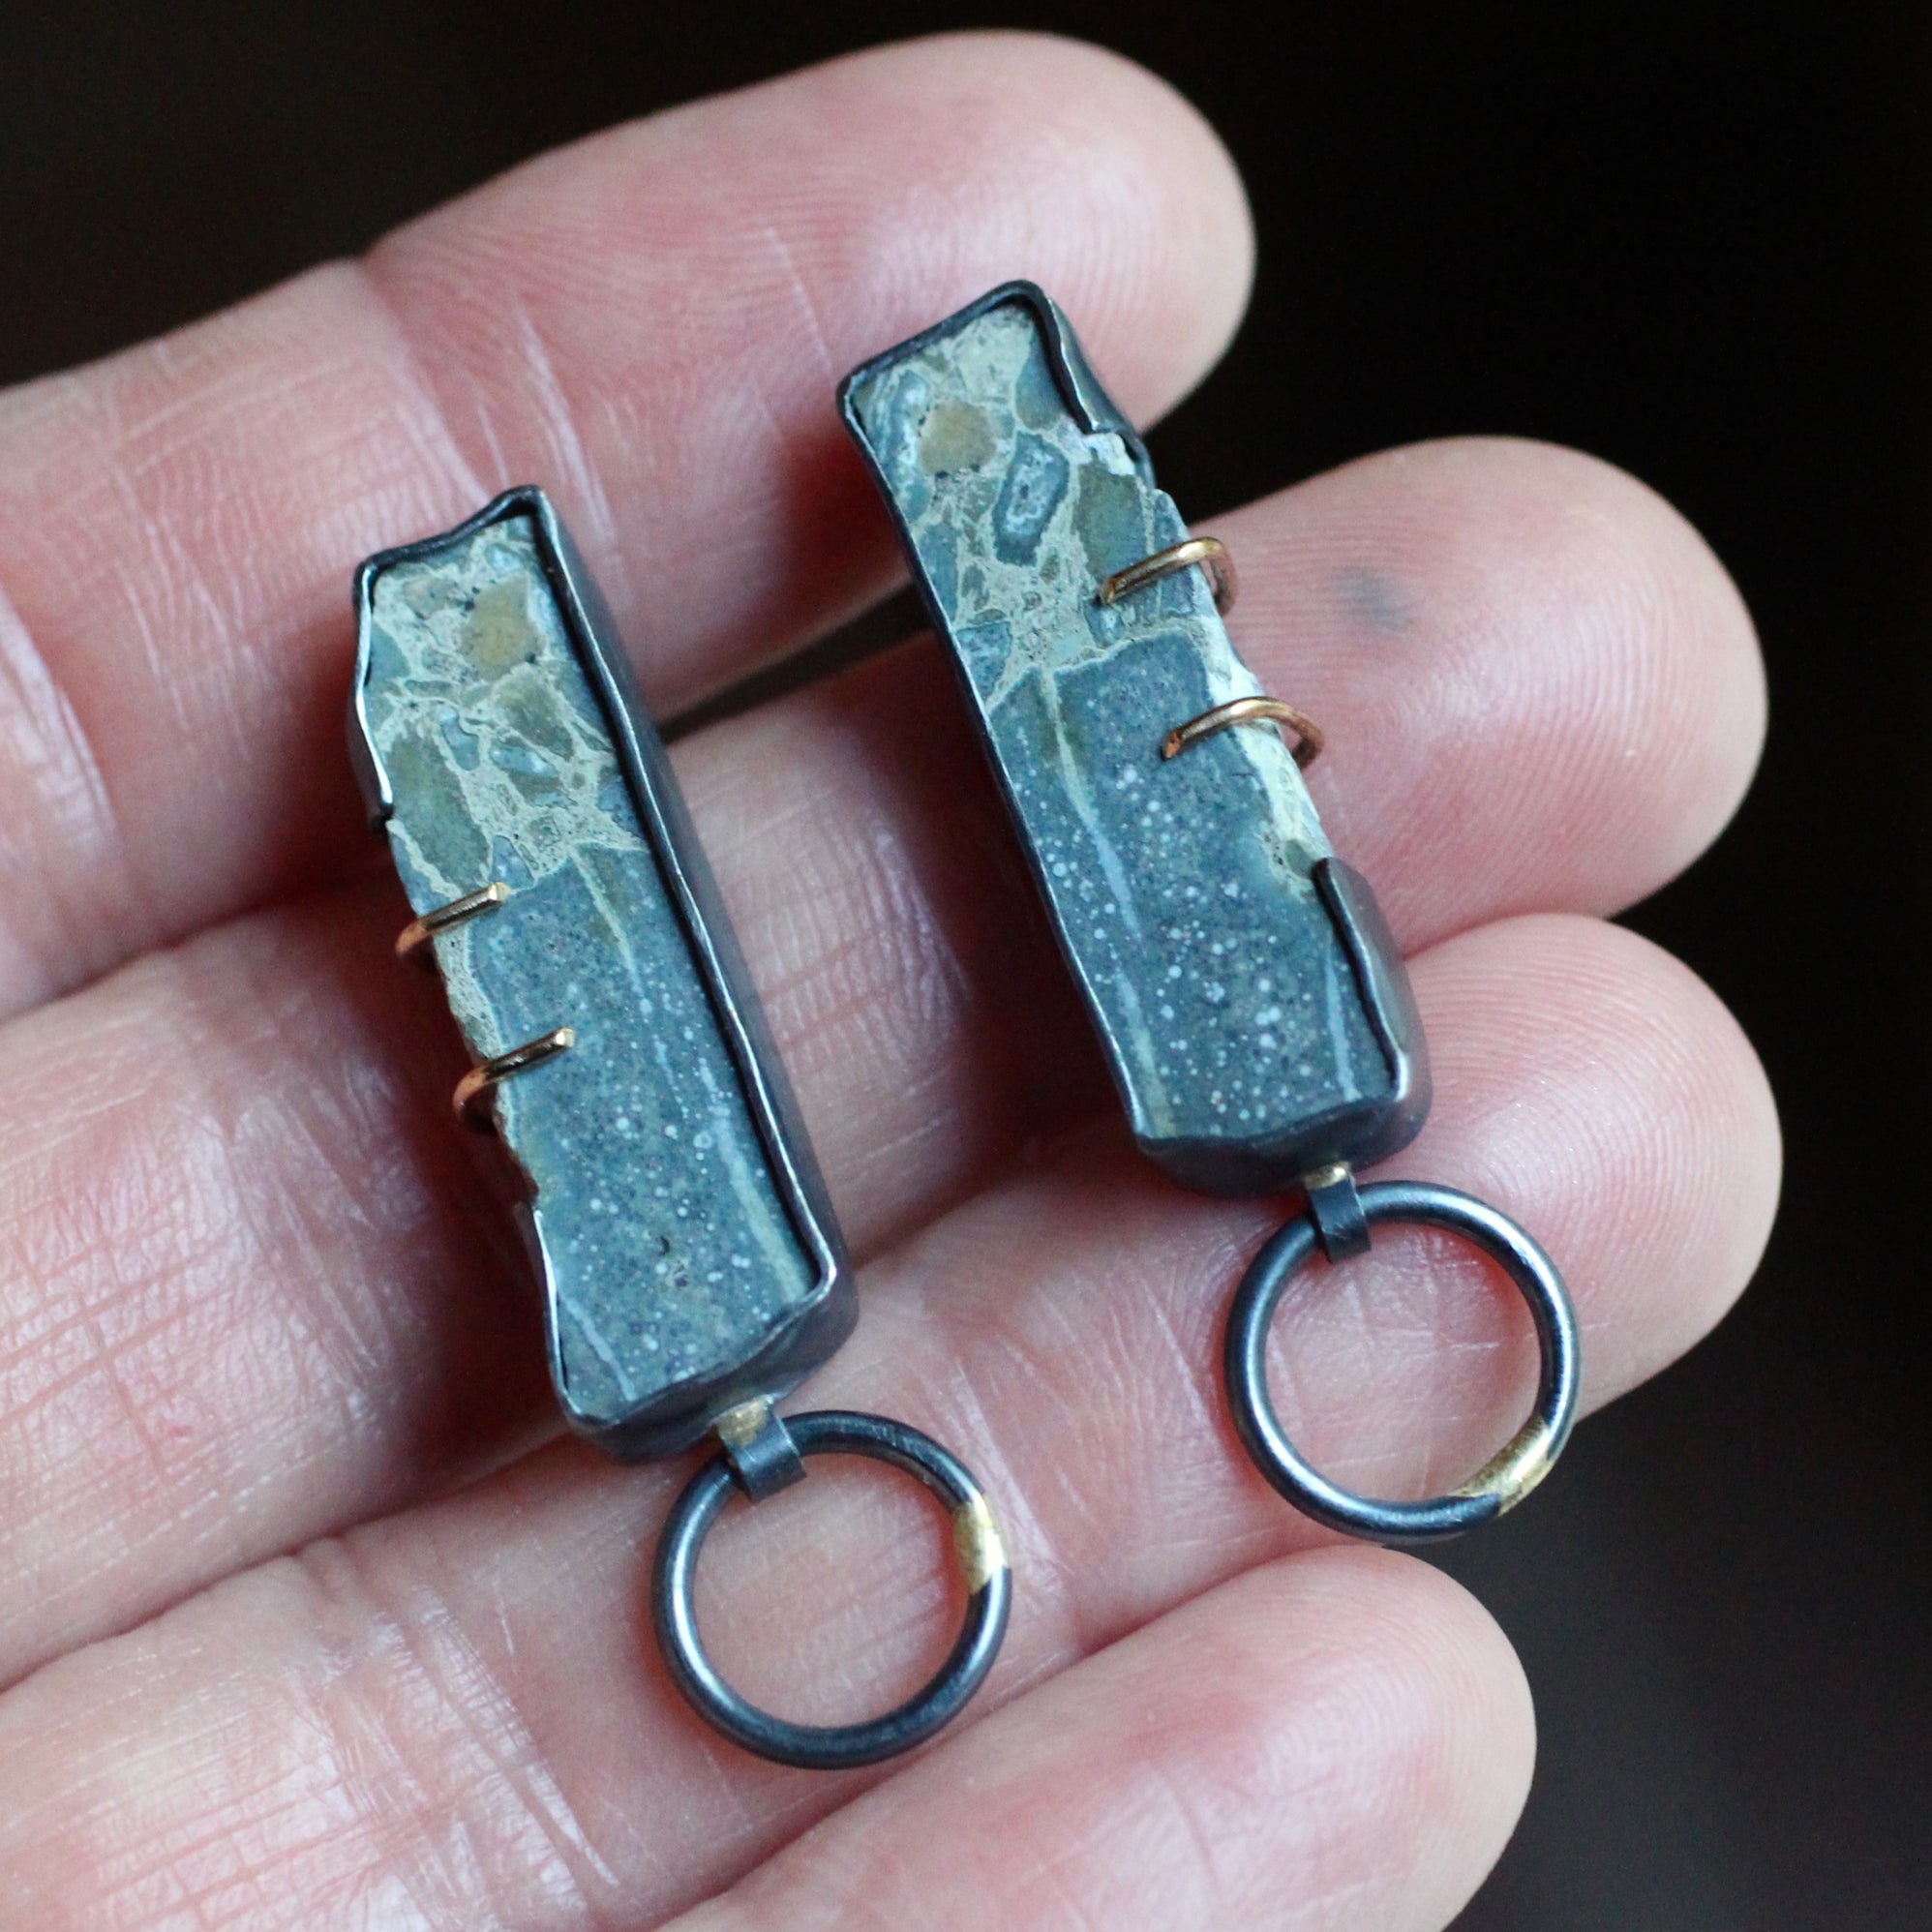 Graphite Slice Earrings with 14k Gold